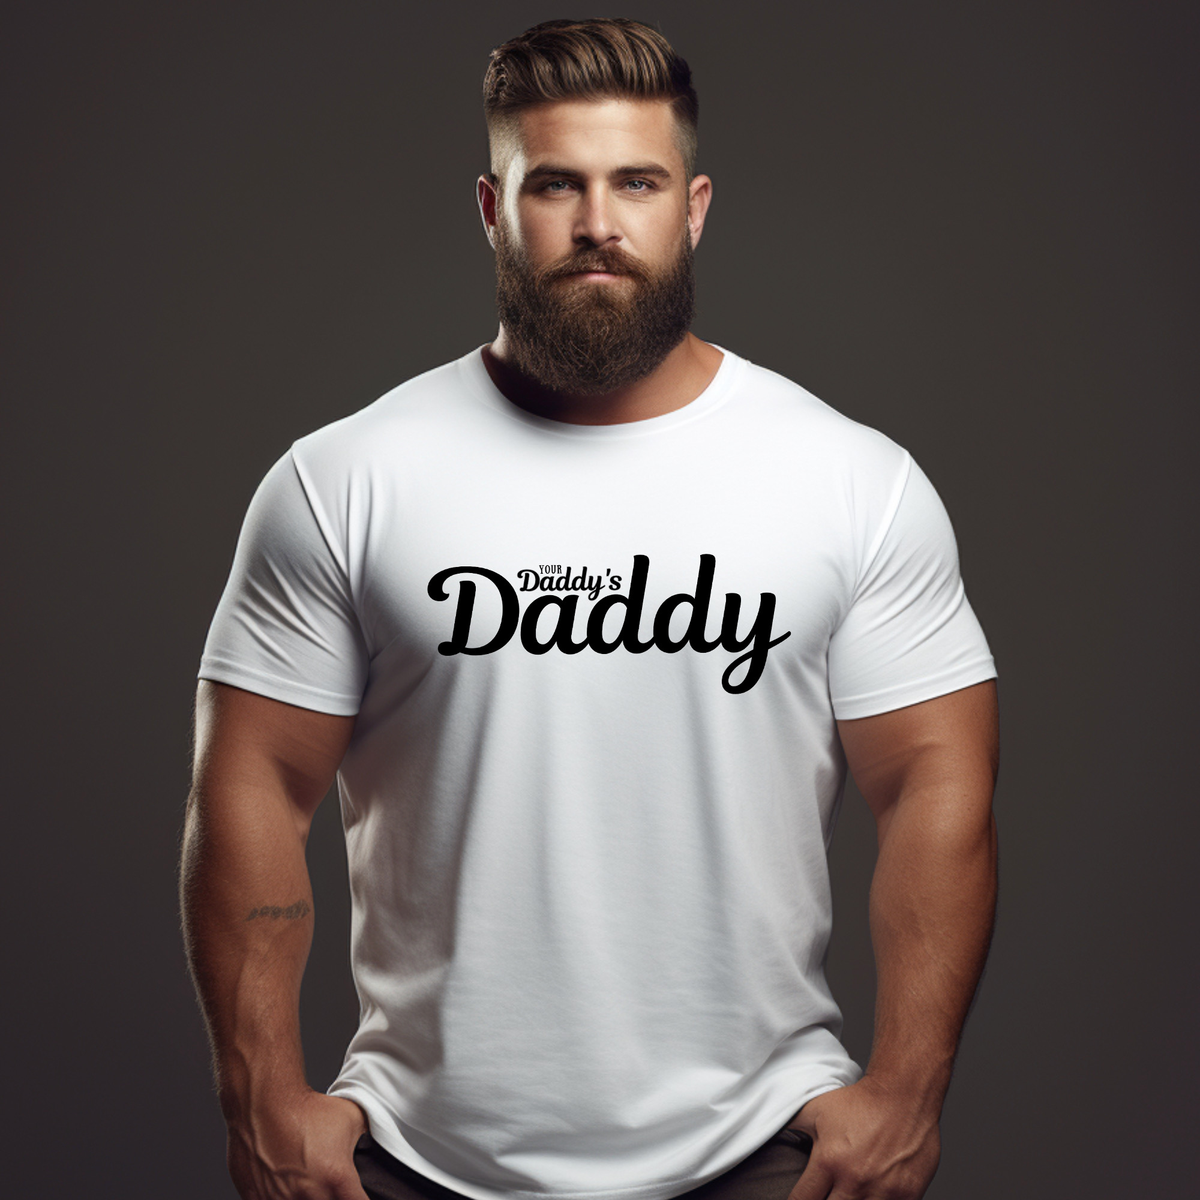 Your Daddy's Daddy Tee